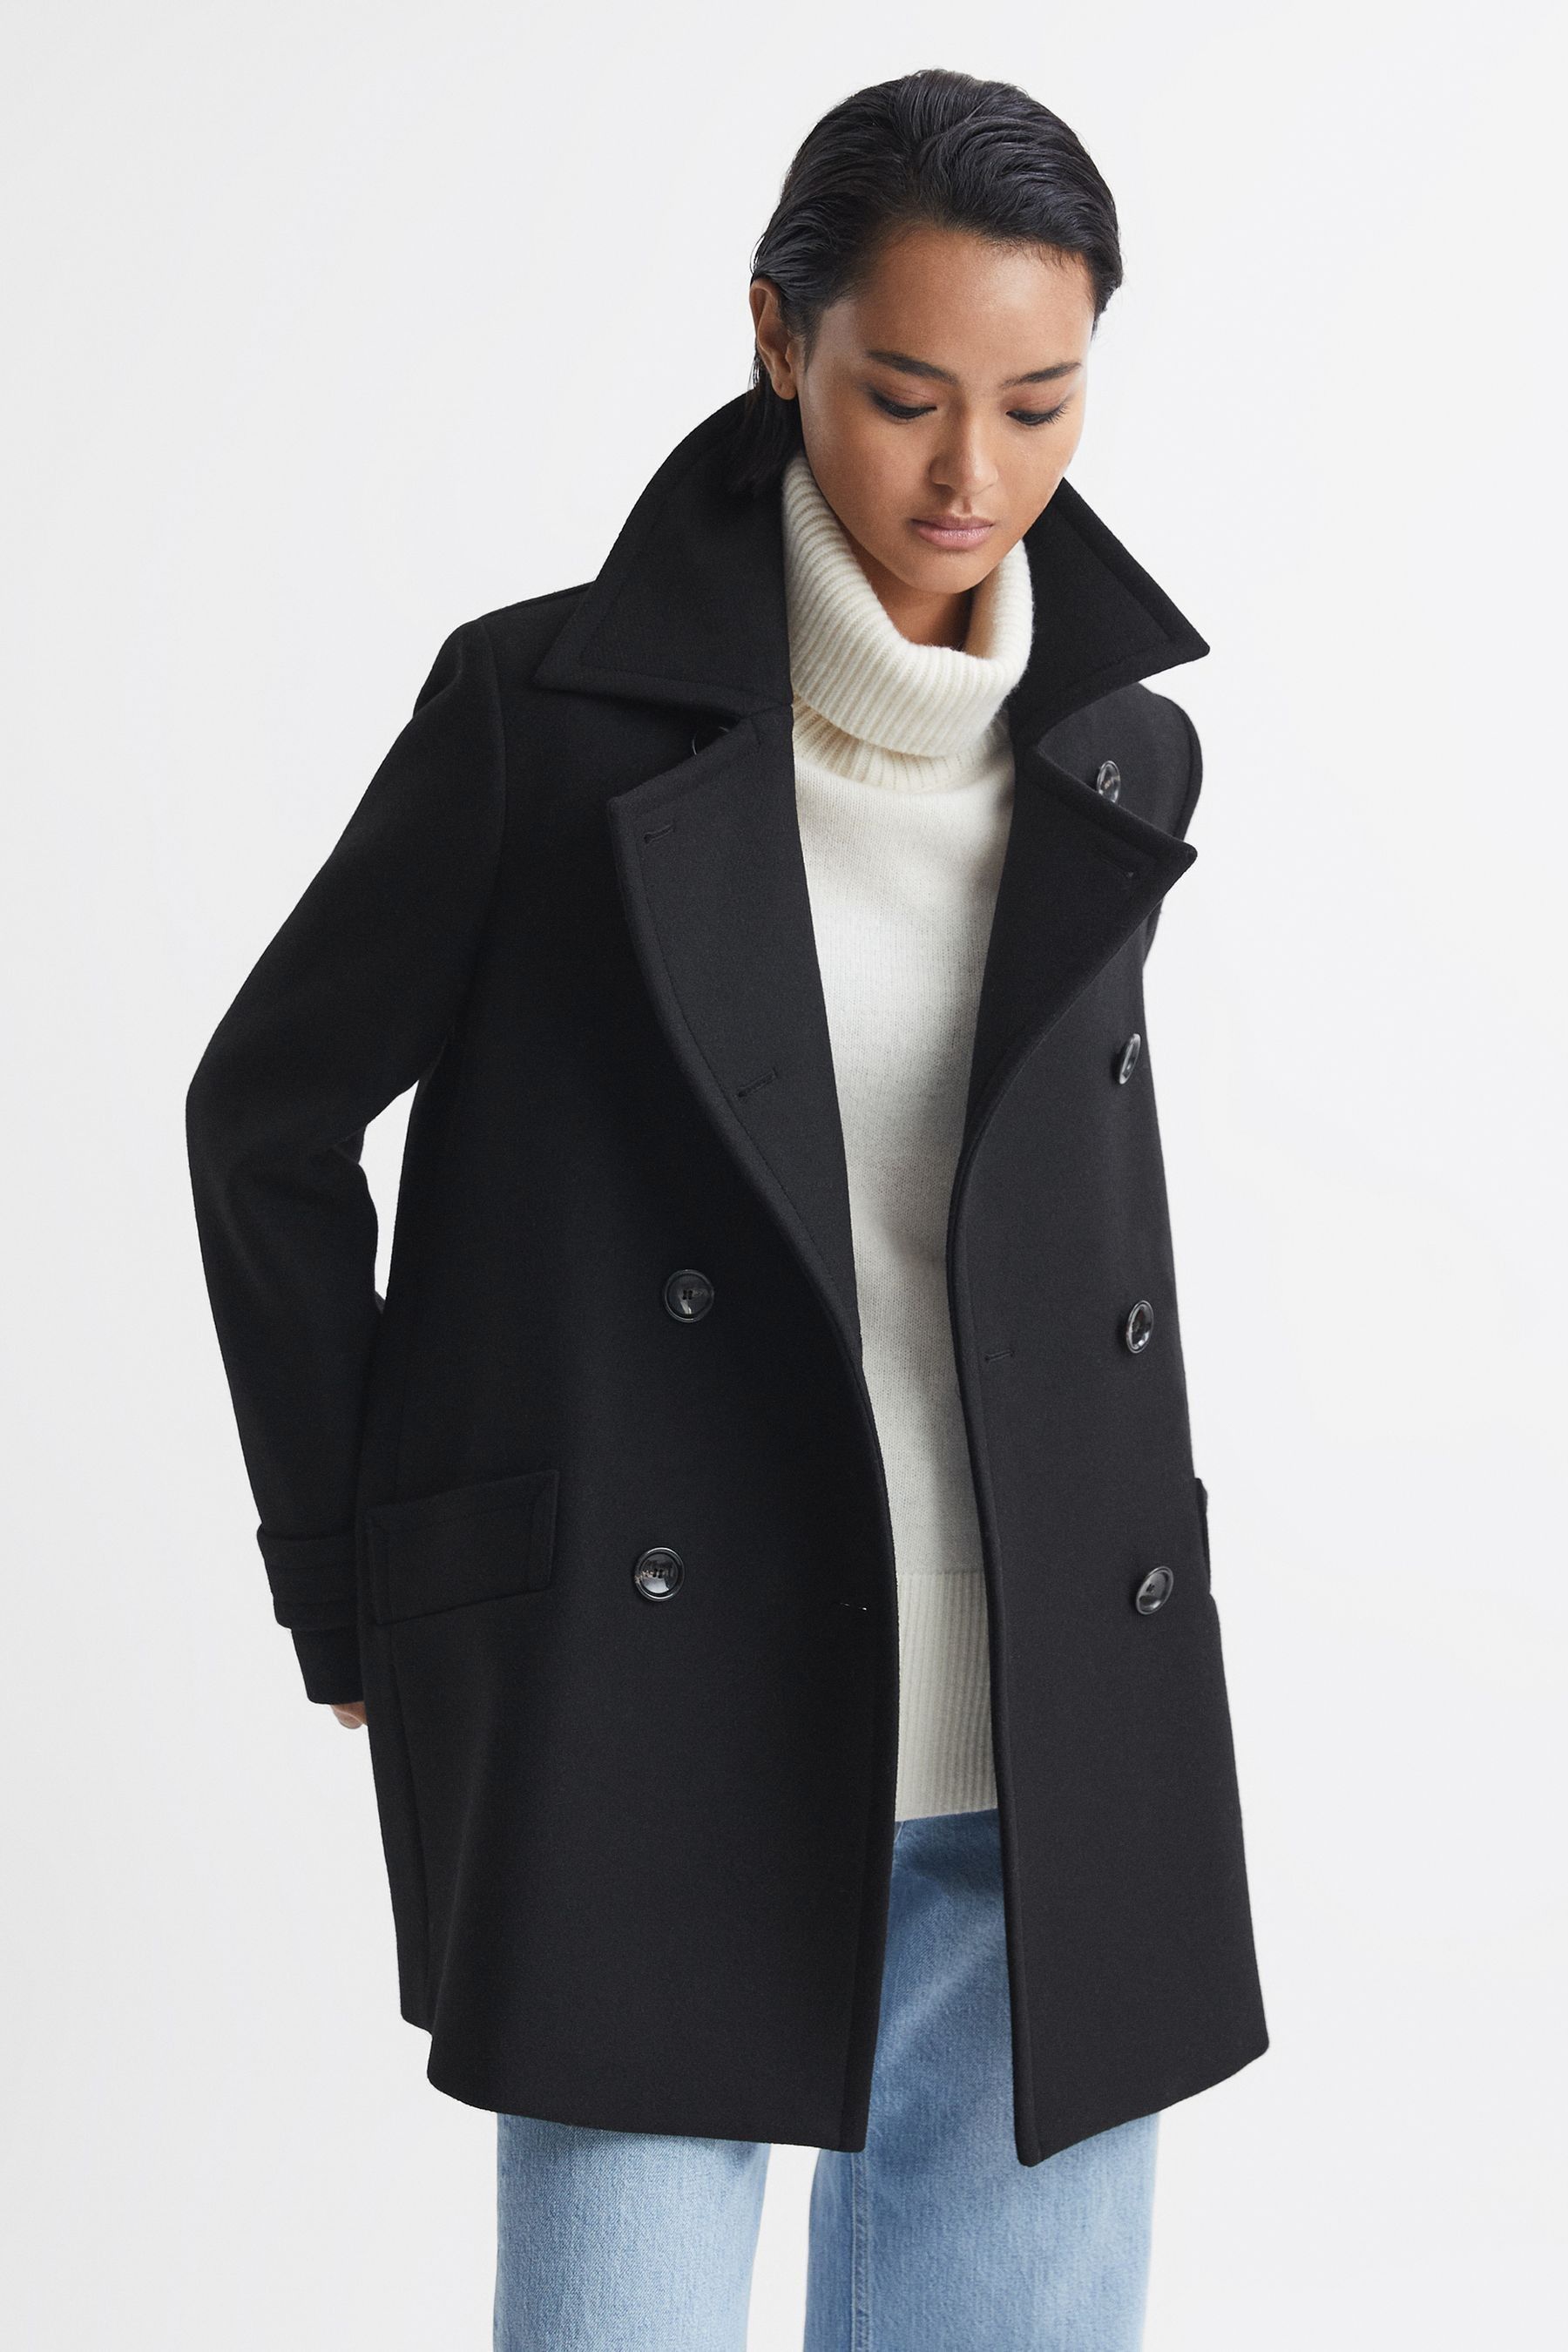 REISS MAISIE - BLACK WOOL BLEND DOUBLE BREASTED COAT, US 6